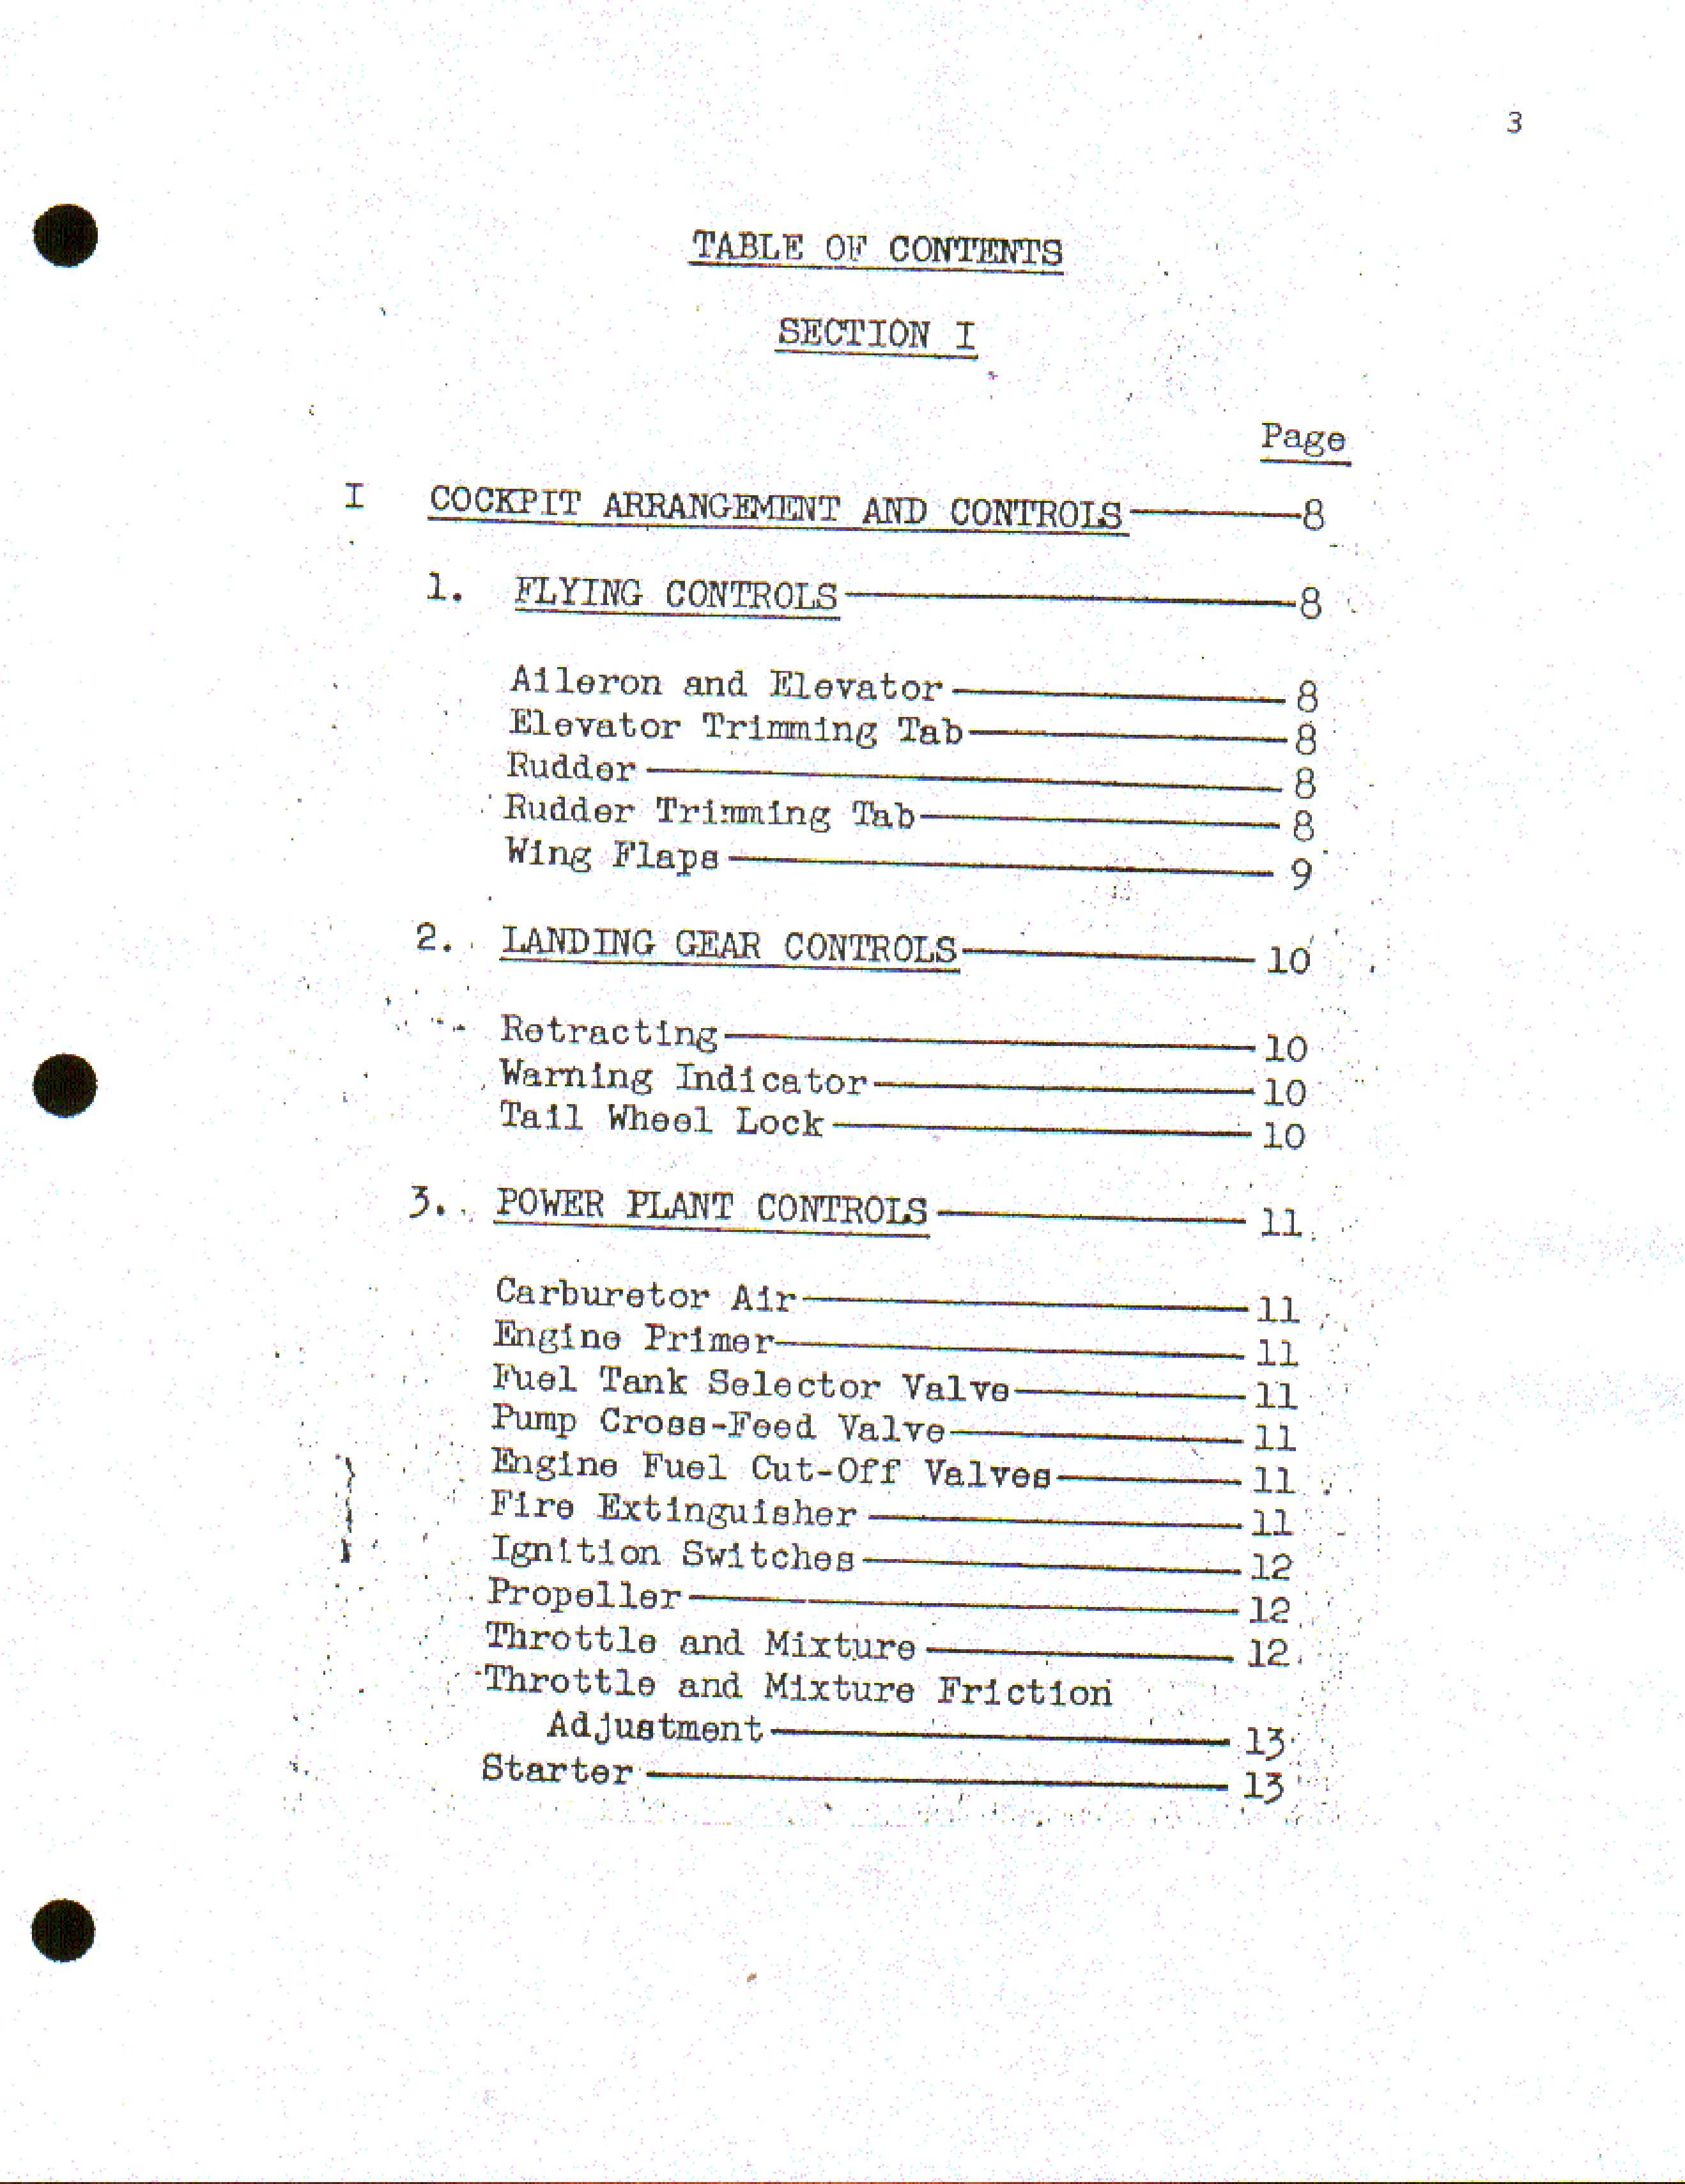 Sample page 6 from AirCorps Library document: Pilot's Handbook for Model JRF-6B, Goose 1A Airplane